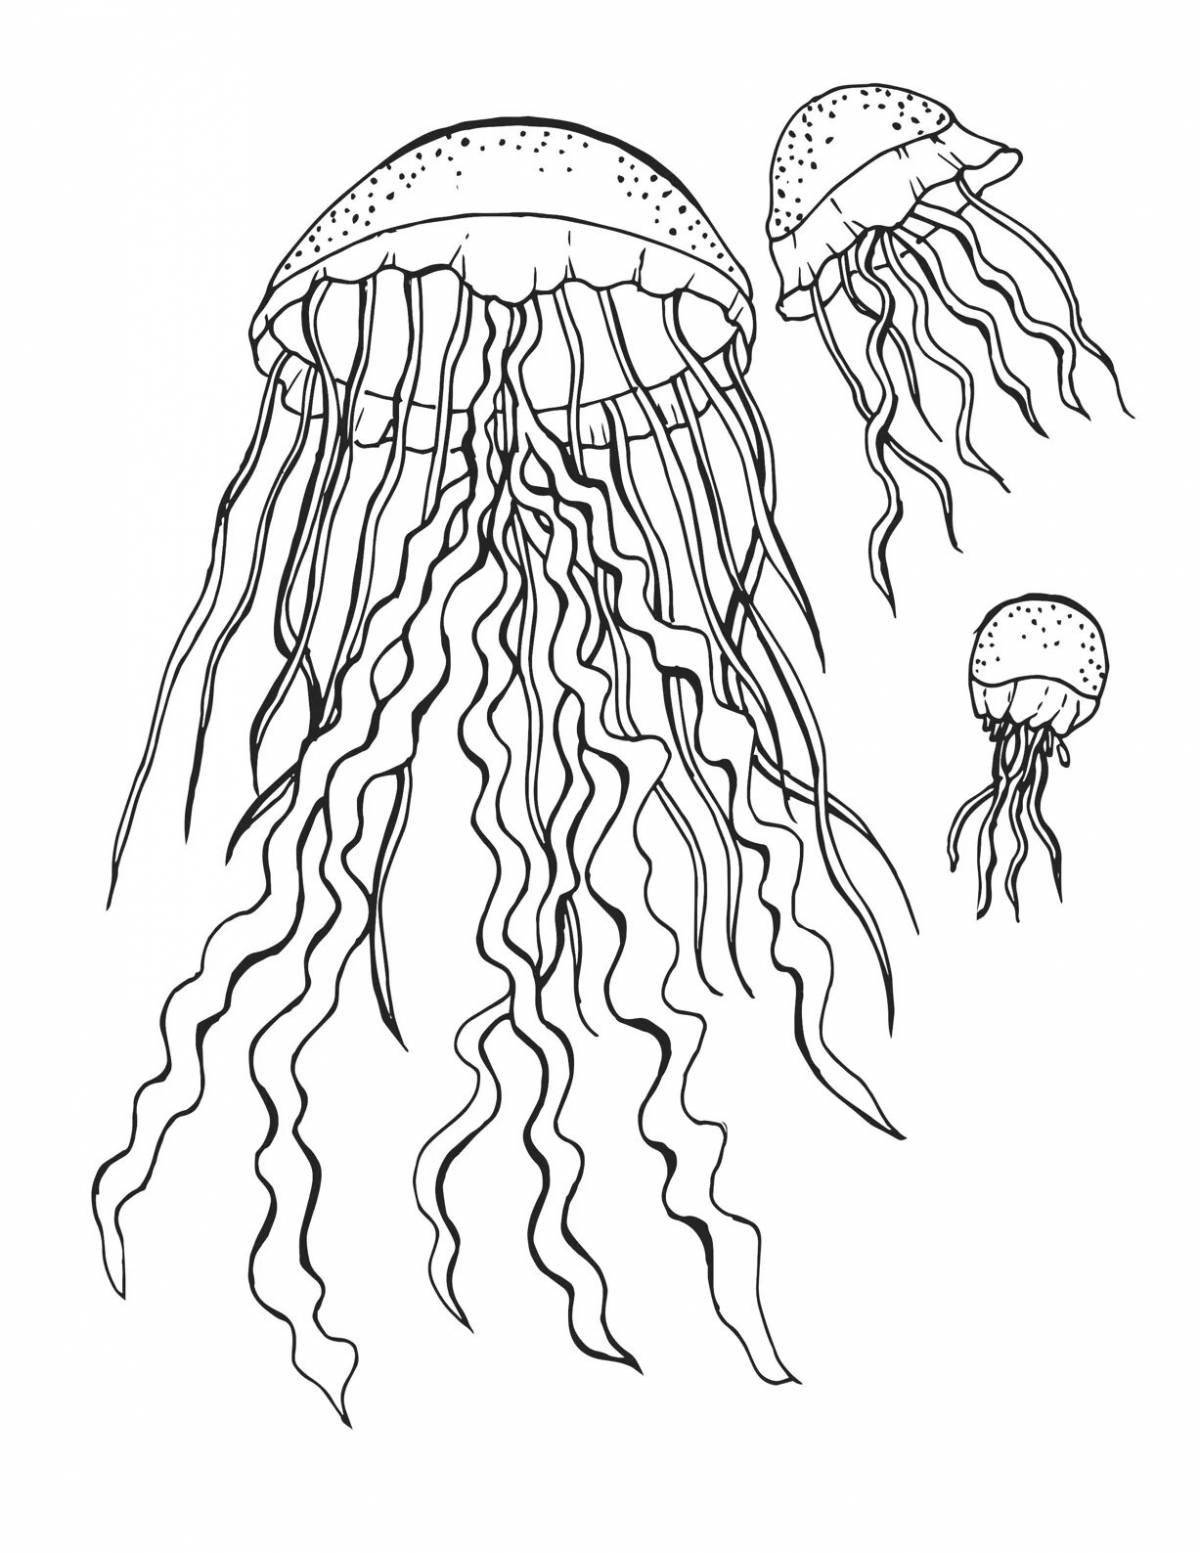 Glowing jellyfish coloring book for kids